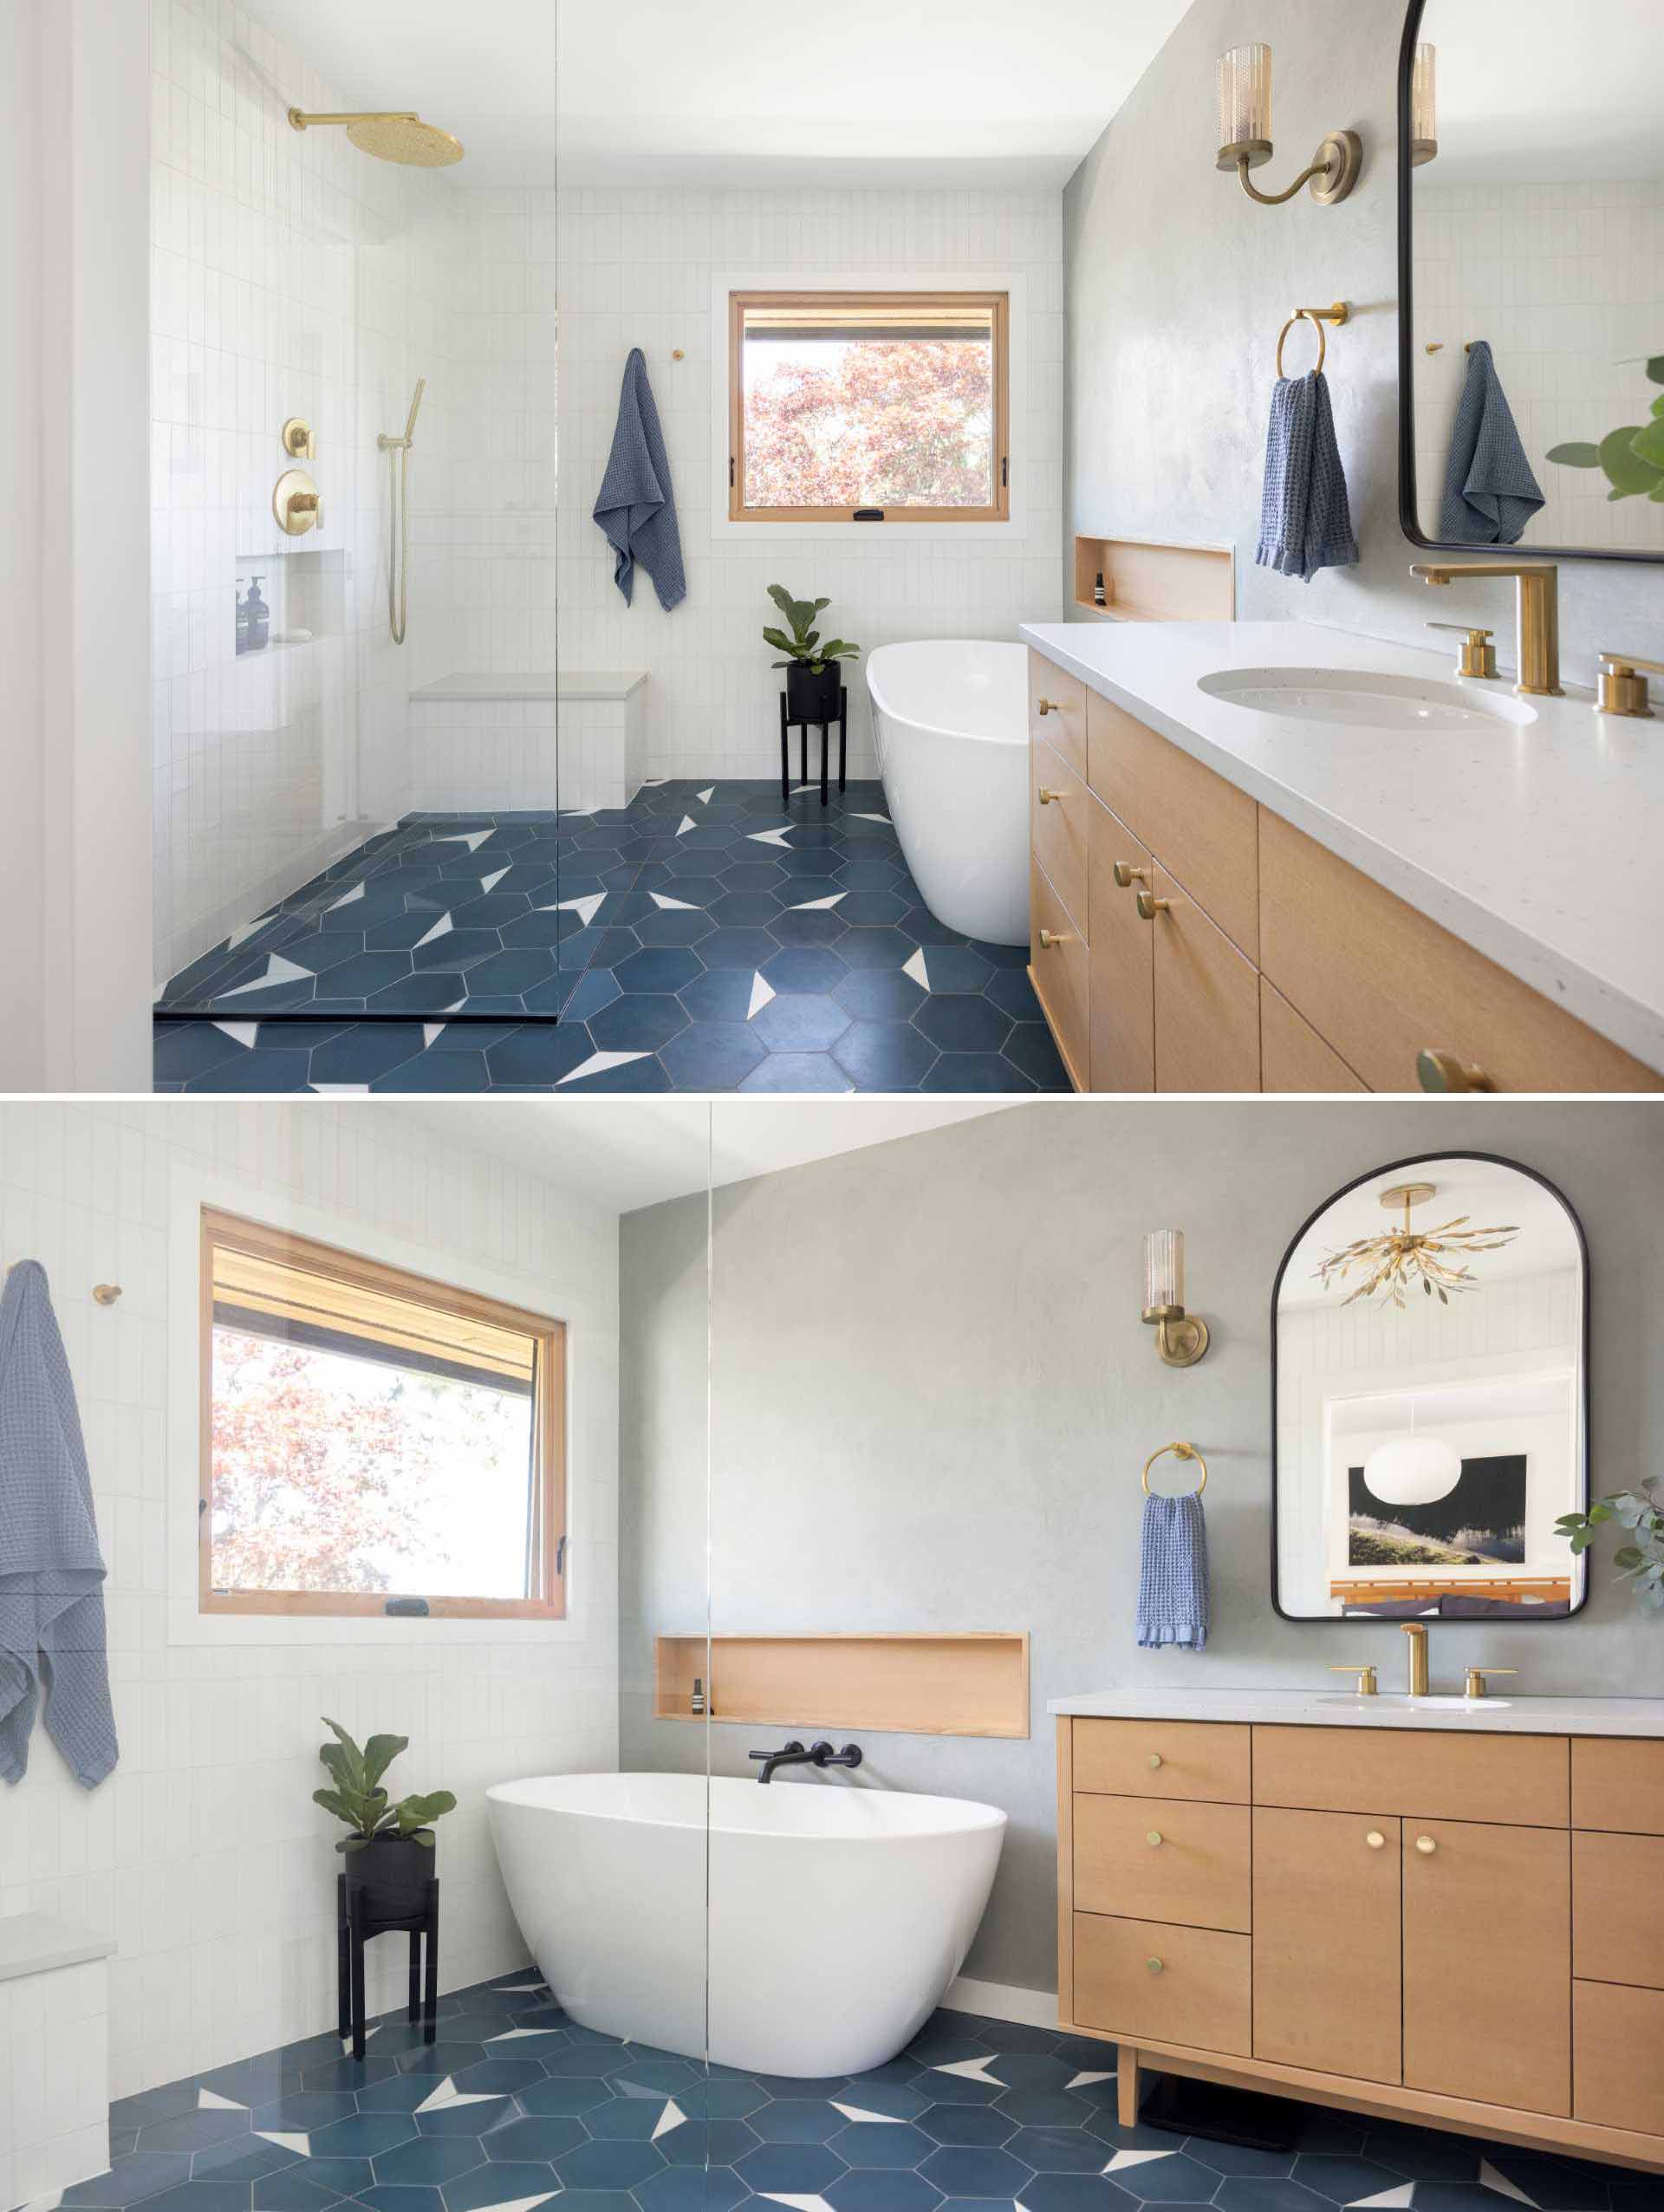 This ensuite bathroom includes a mid-century modern inspired tile flooring, a walk-in shower with a bench, white tiled walls, a freestanding bathtub with wood shelving niche, and a wood vanity.